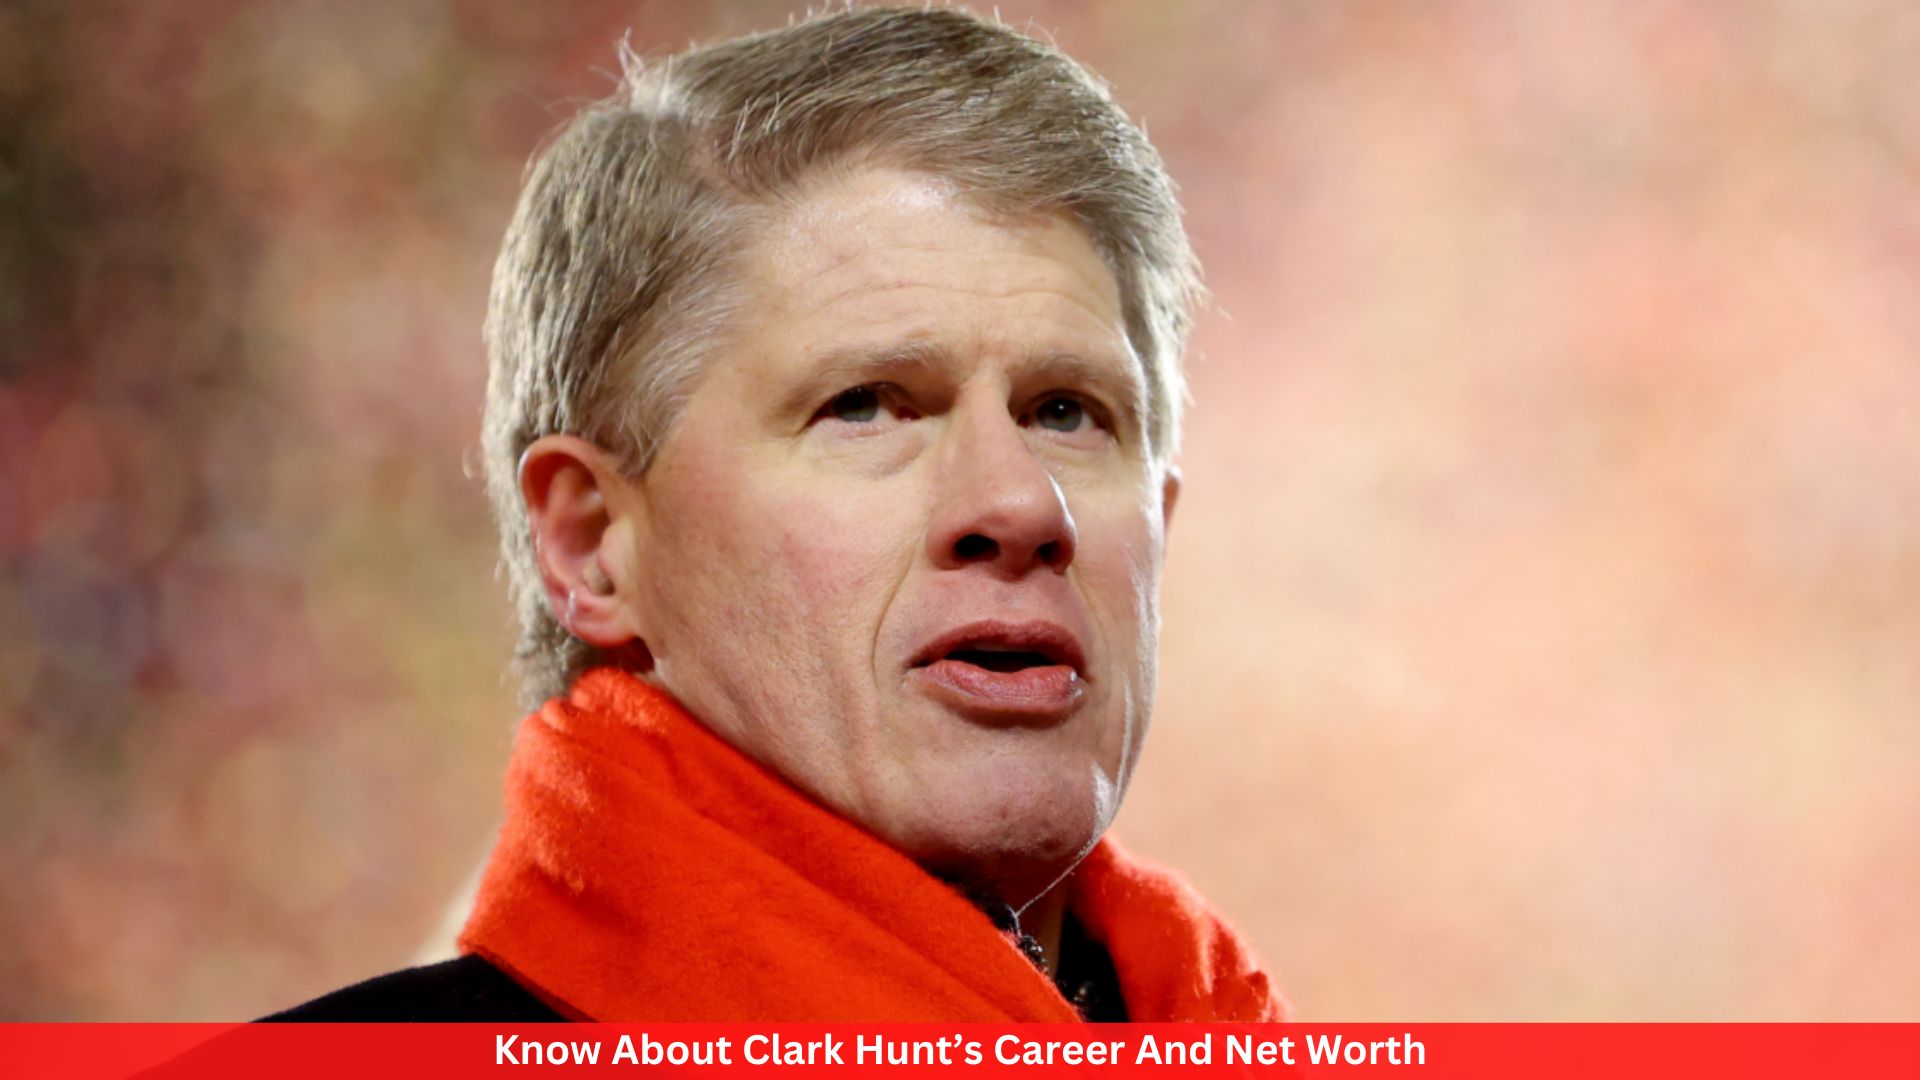 Know About Clark Hunt’s Career And Net Worth